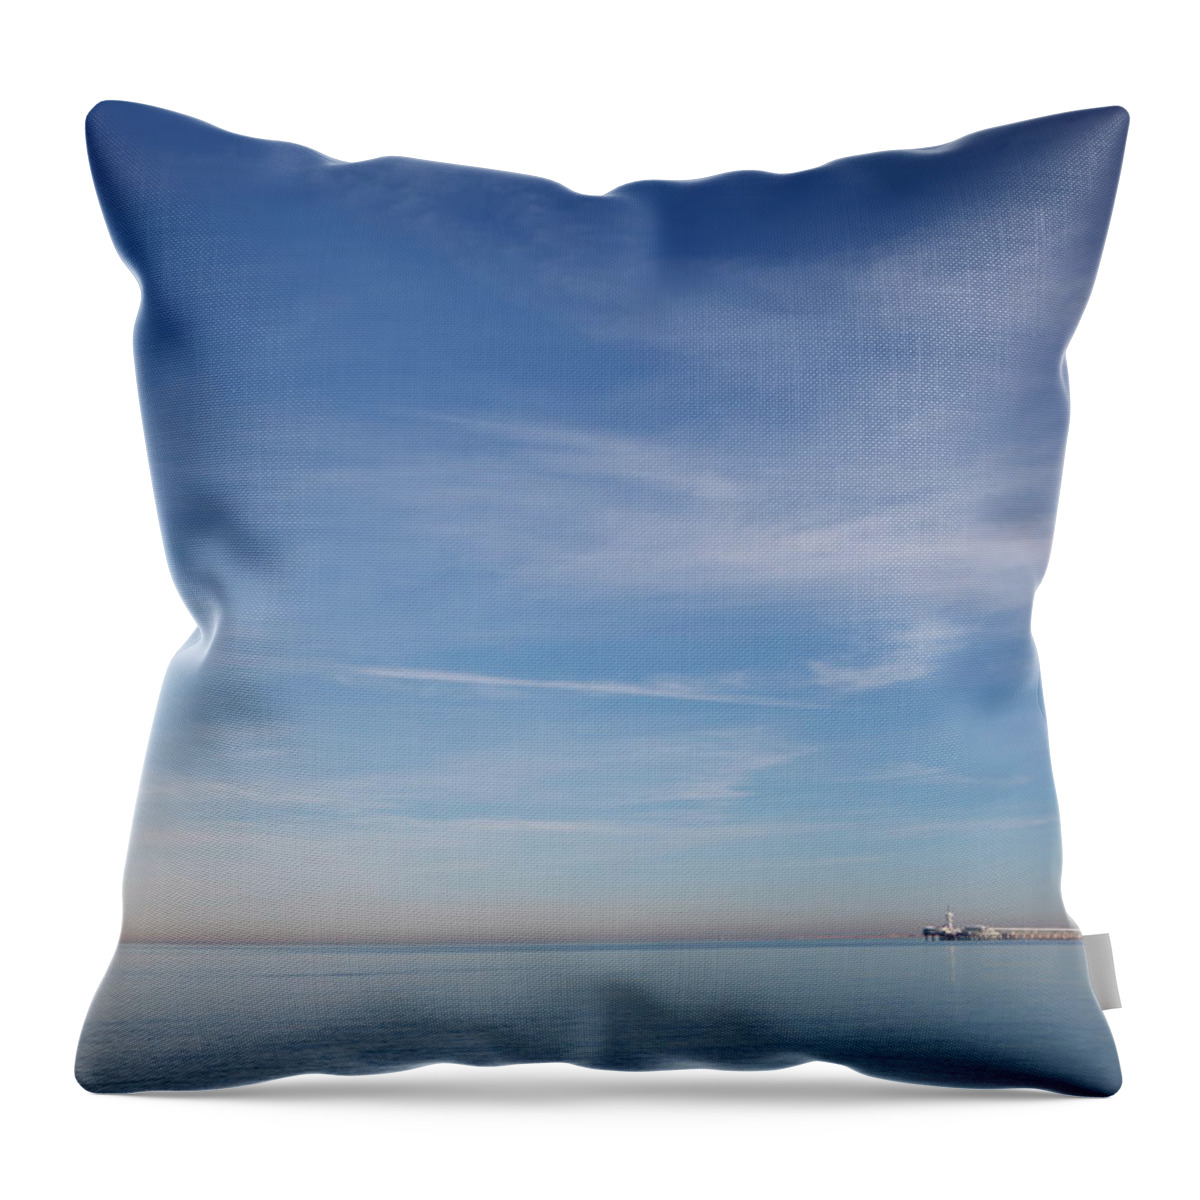 Apartment Throw Pillow featuring the photograph North Sea Coastline by Digiclicks